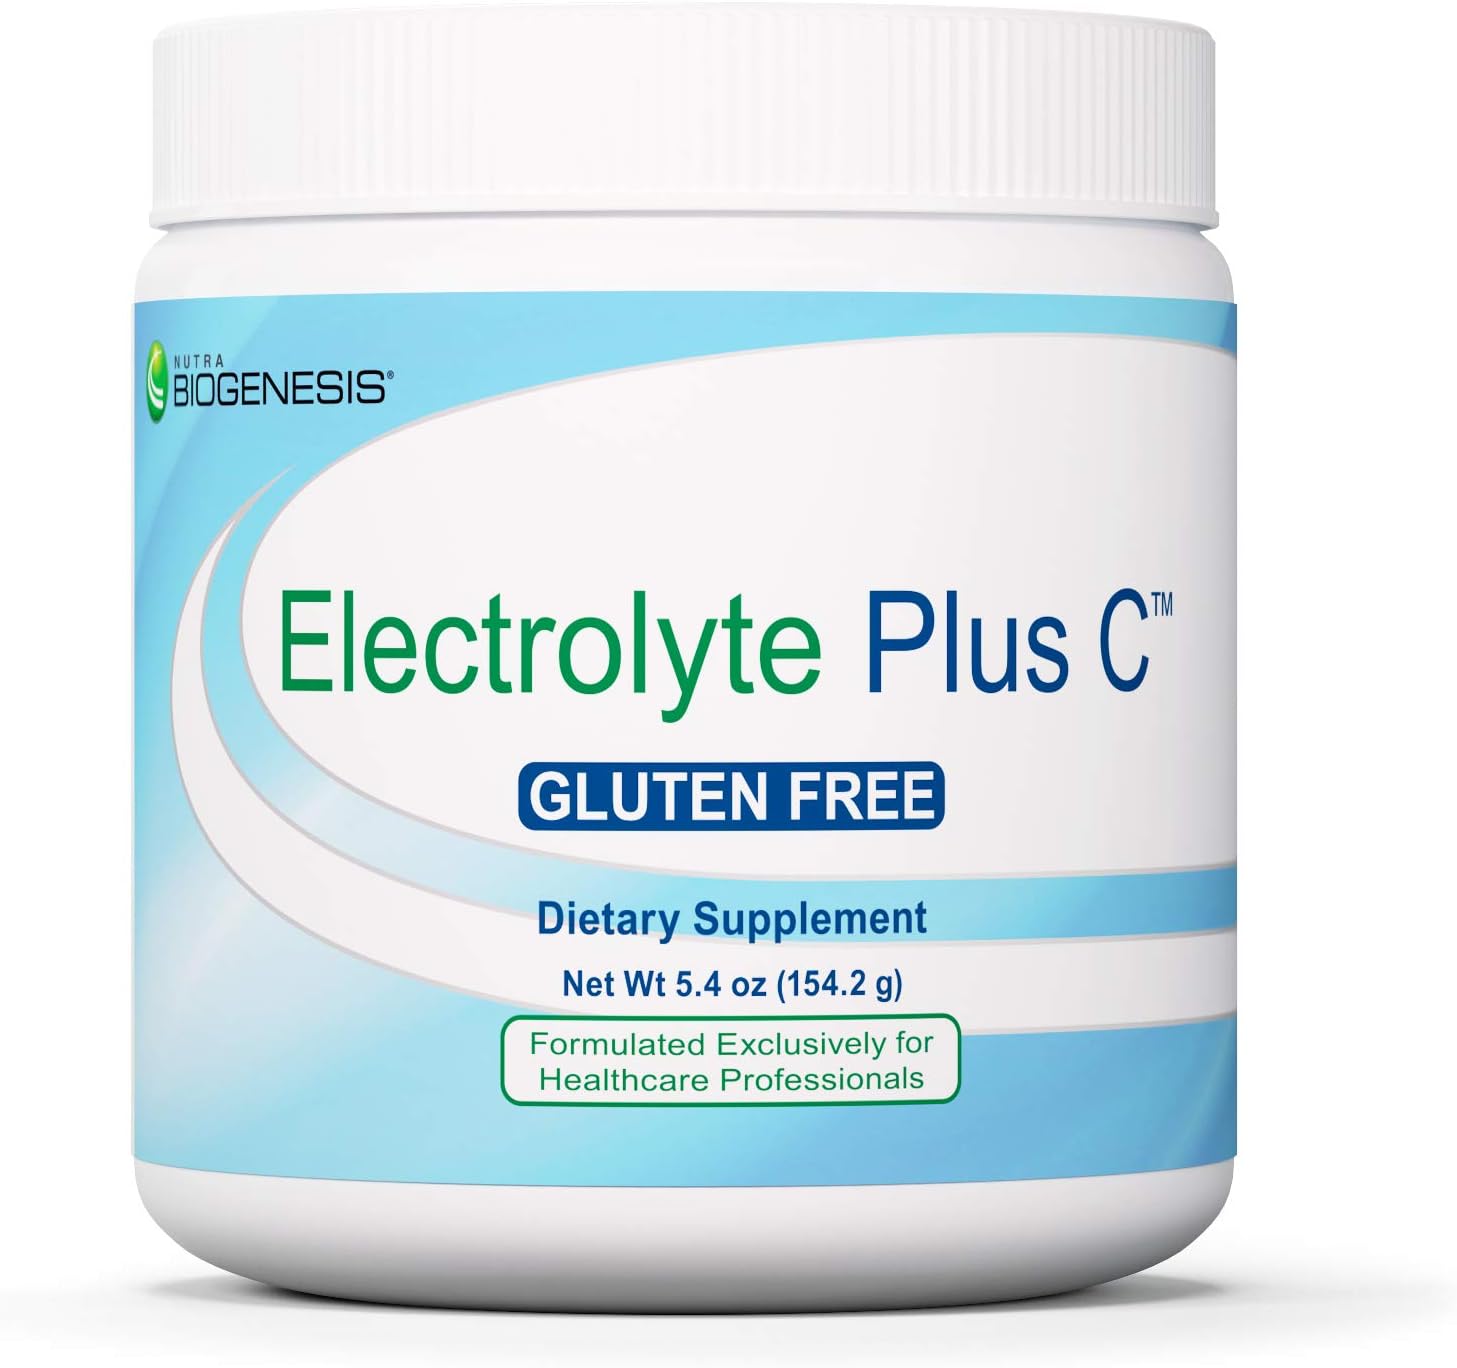 Nutra BioGenesis - Electrolyte Plus C - Delicious Electrolyte Powder with Trace Minerals, Vitamins & Herbal Antioxidants - Gluten Free - 154.2 g